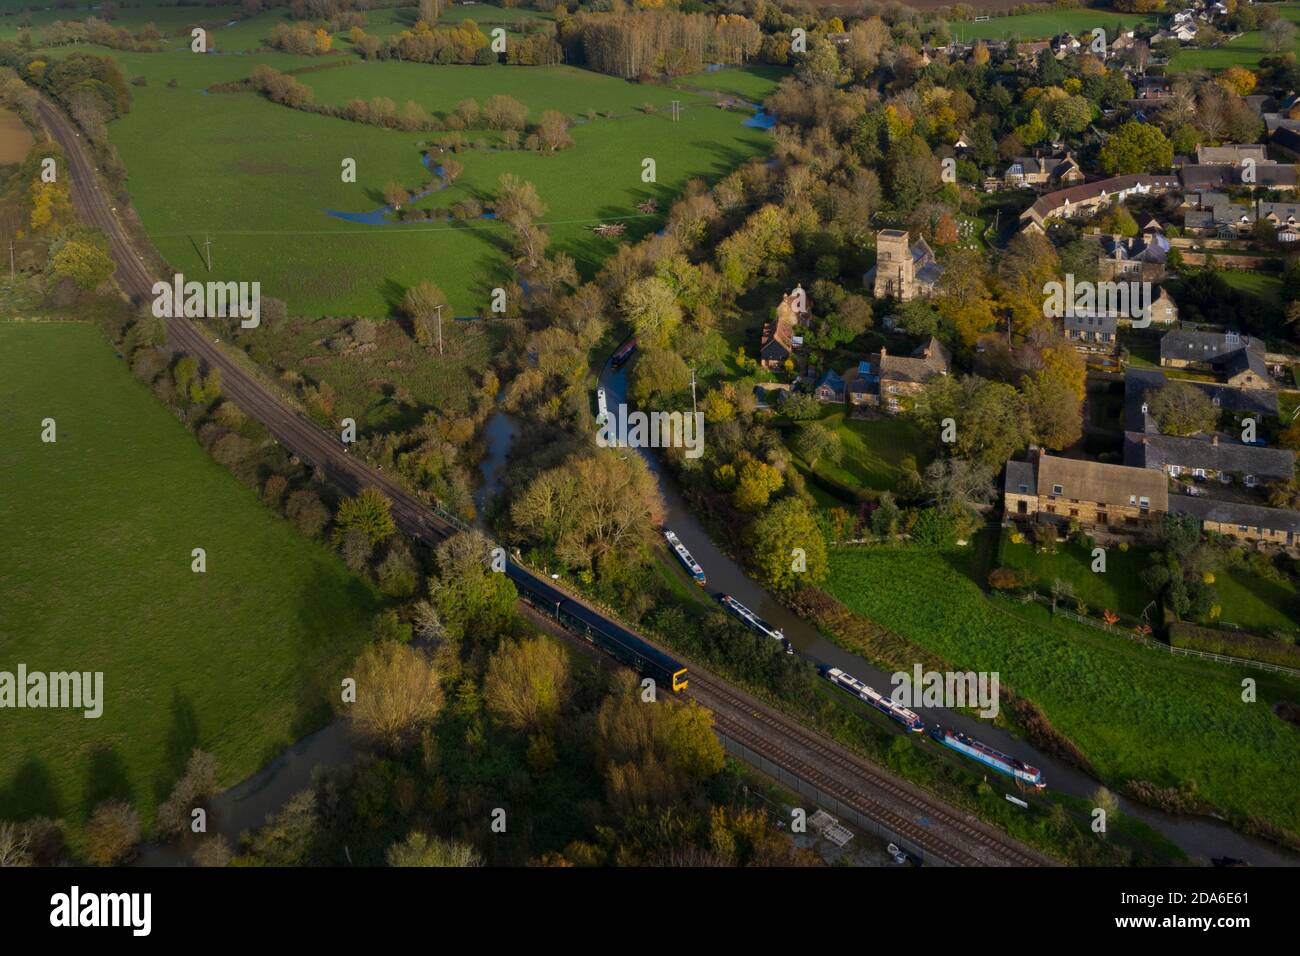 Village Railway and Canal at Lower Heyford, Oxfordshire,England Stock Photo